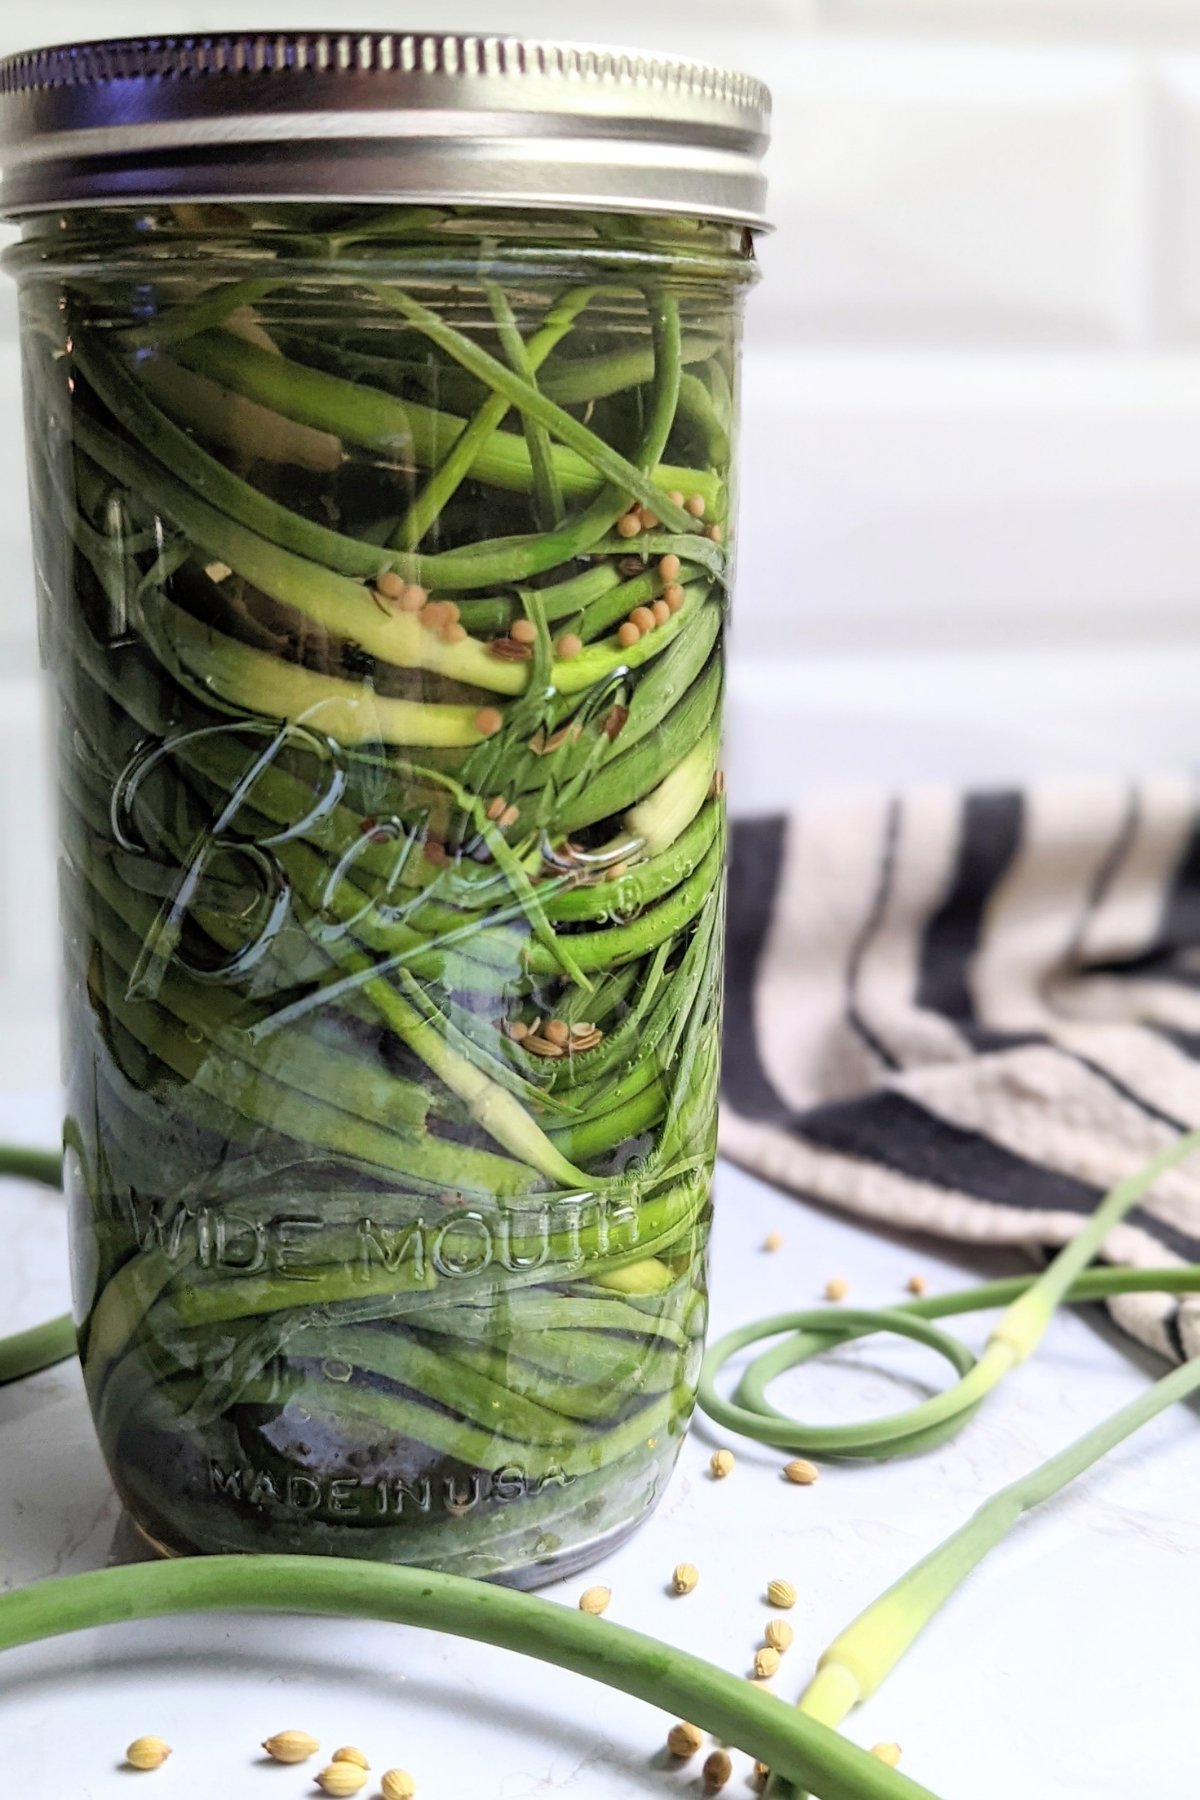 garlic scape recipes with pickled scapes in vinegar sugar dill garlic mustard seed fennel seed and chili peppers